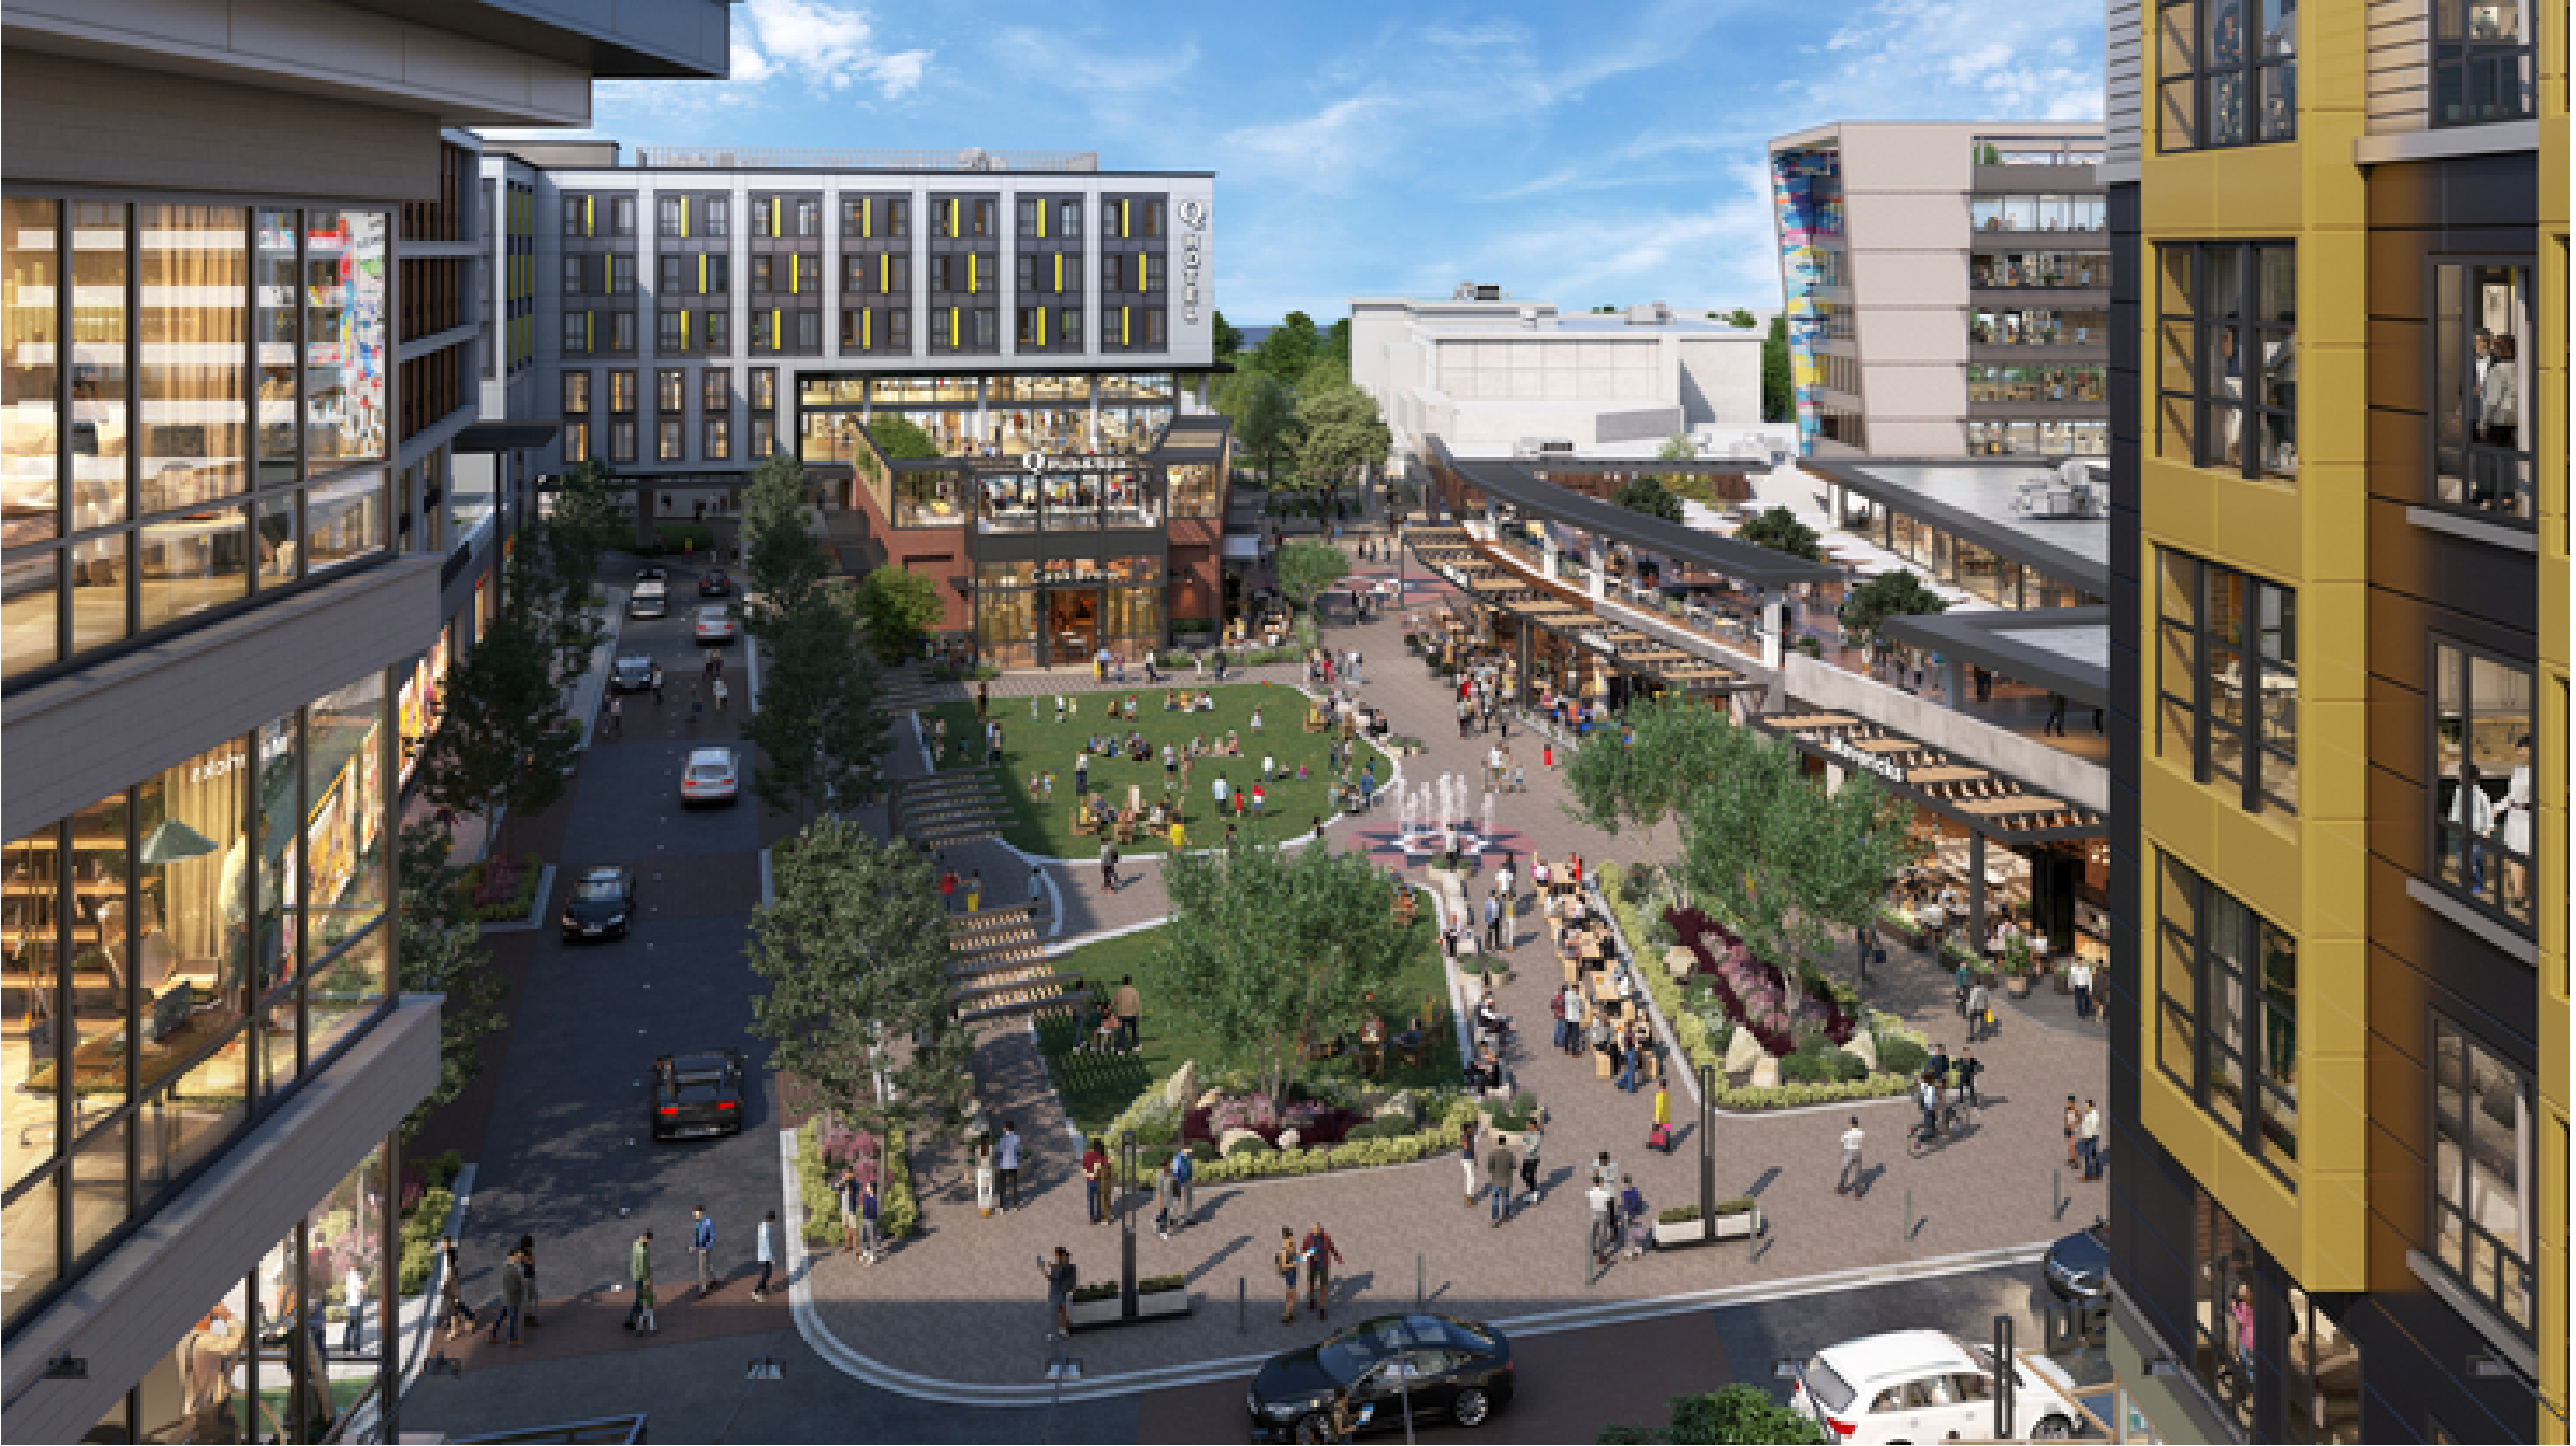 Skokie votes to designate Old Orchard Mall as a business district